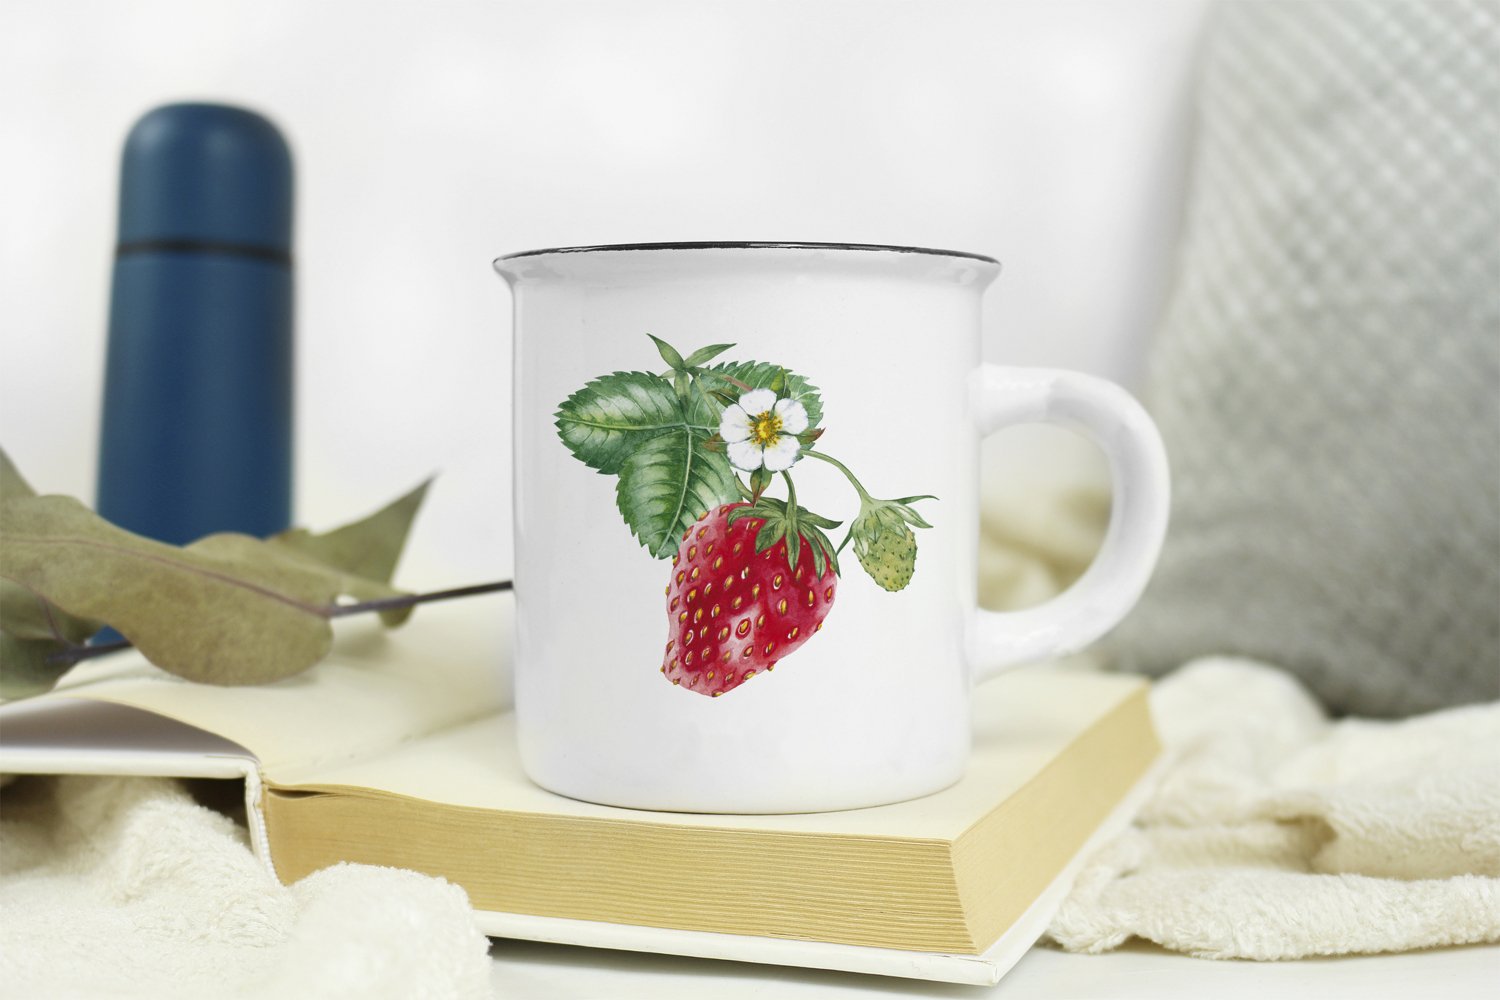 Cup with cute strawberry image.